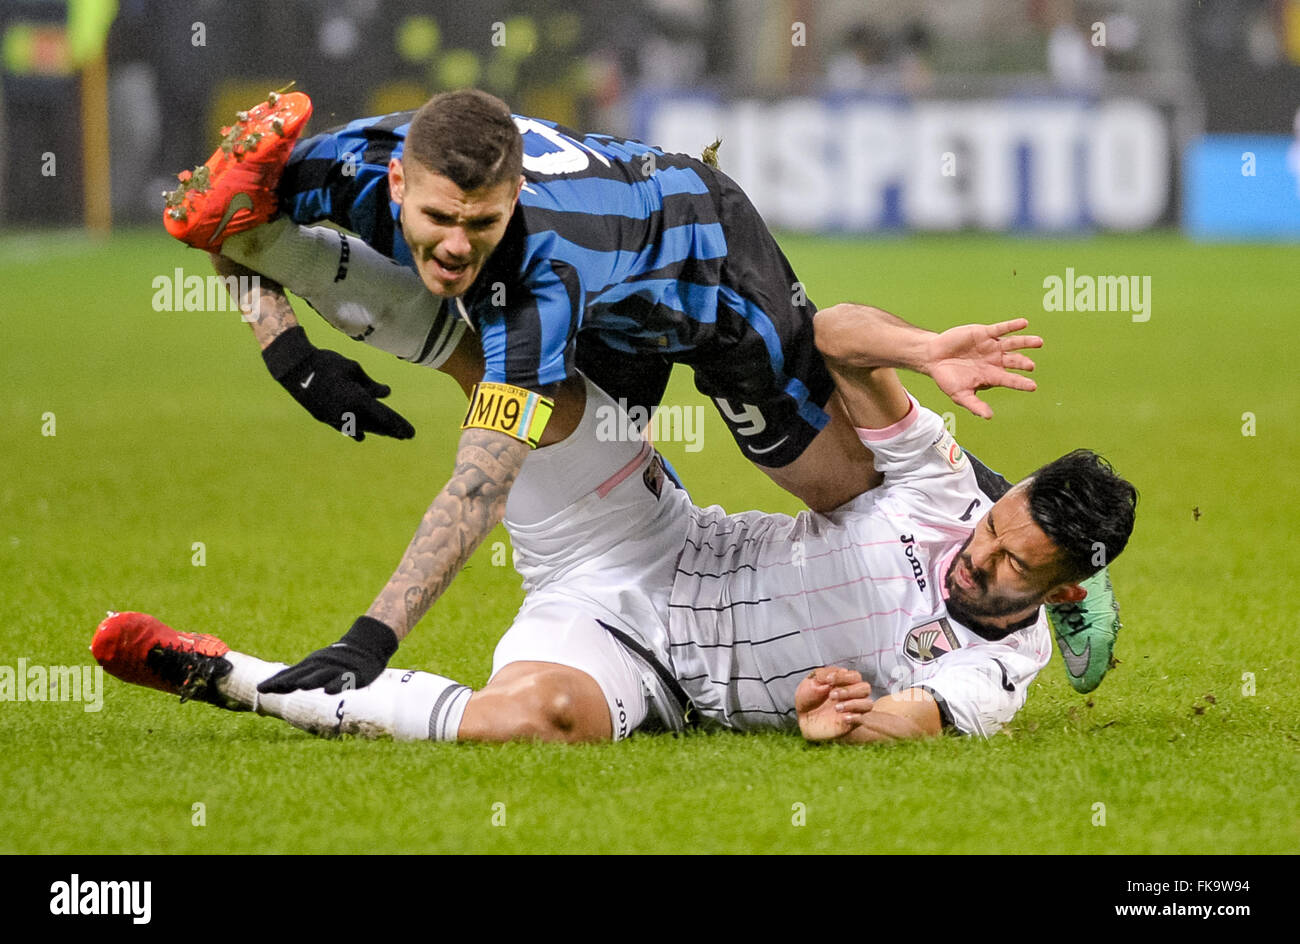 Milan, Italy. 06th Mar, 2016. Mauro Icardi of FC Internazionale and Giancarlo Gonzalez fight for the ball during the Serie A football match between FC Internazionale and US Città di Palermo. FC Internazionale wins 3-1 over US CIttà di Palermo. © Nicolò Campo/Pacific Press/Alamy Live News Stock Photo